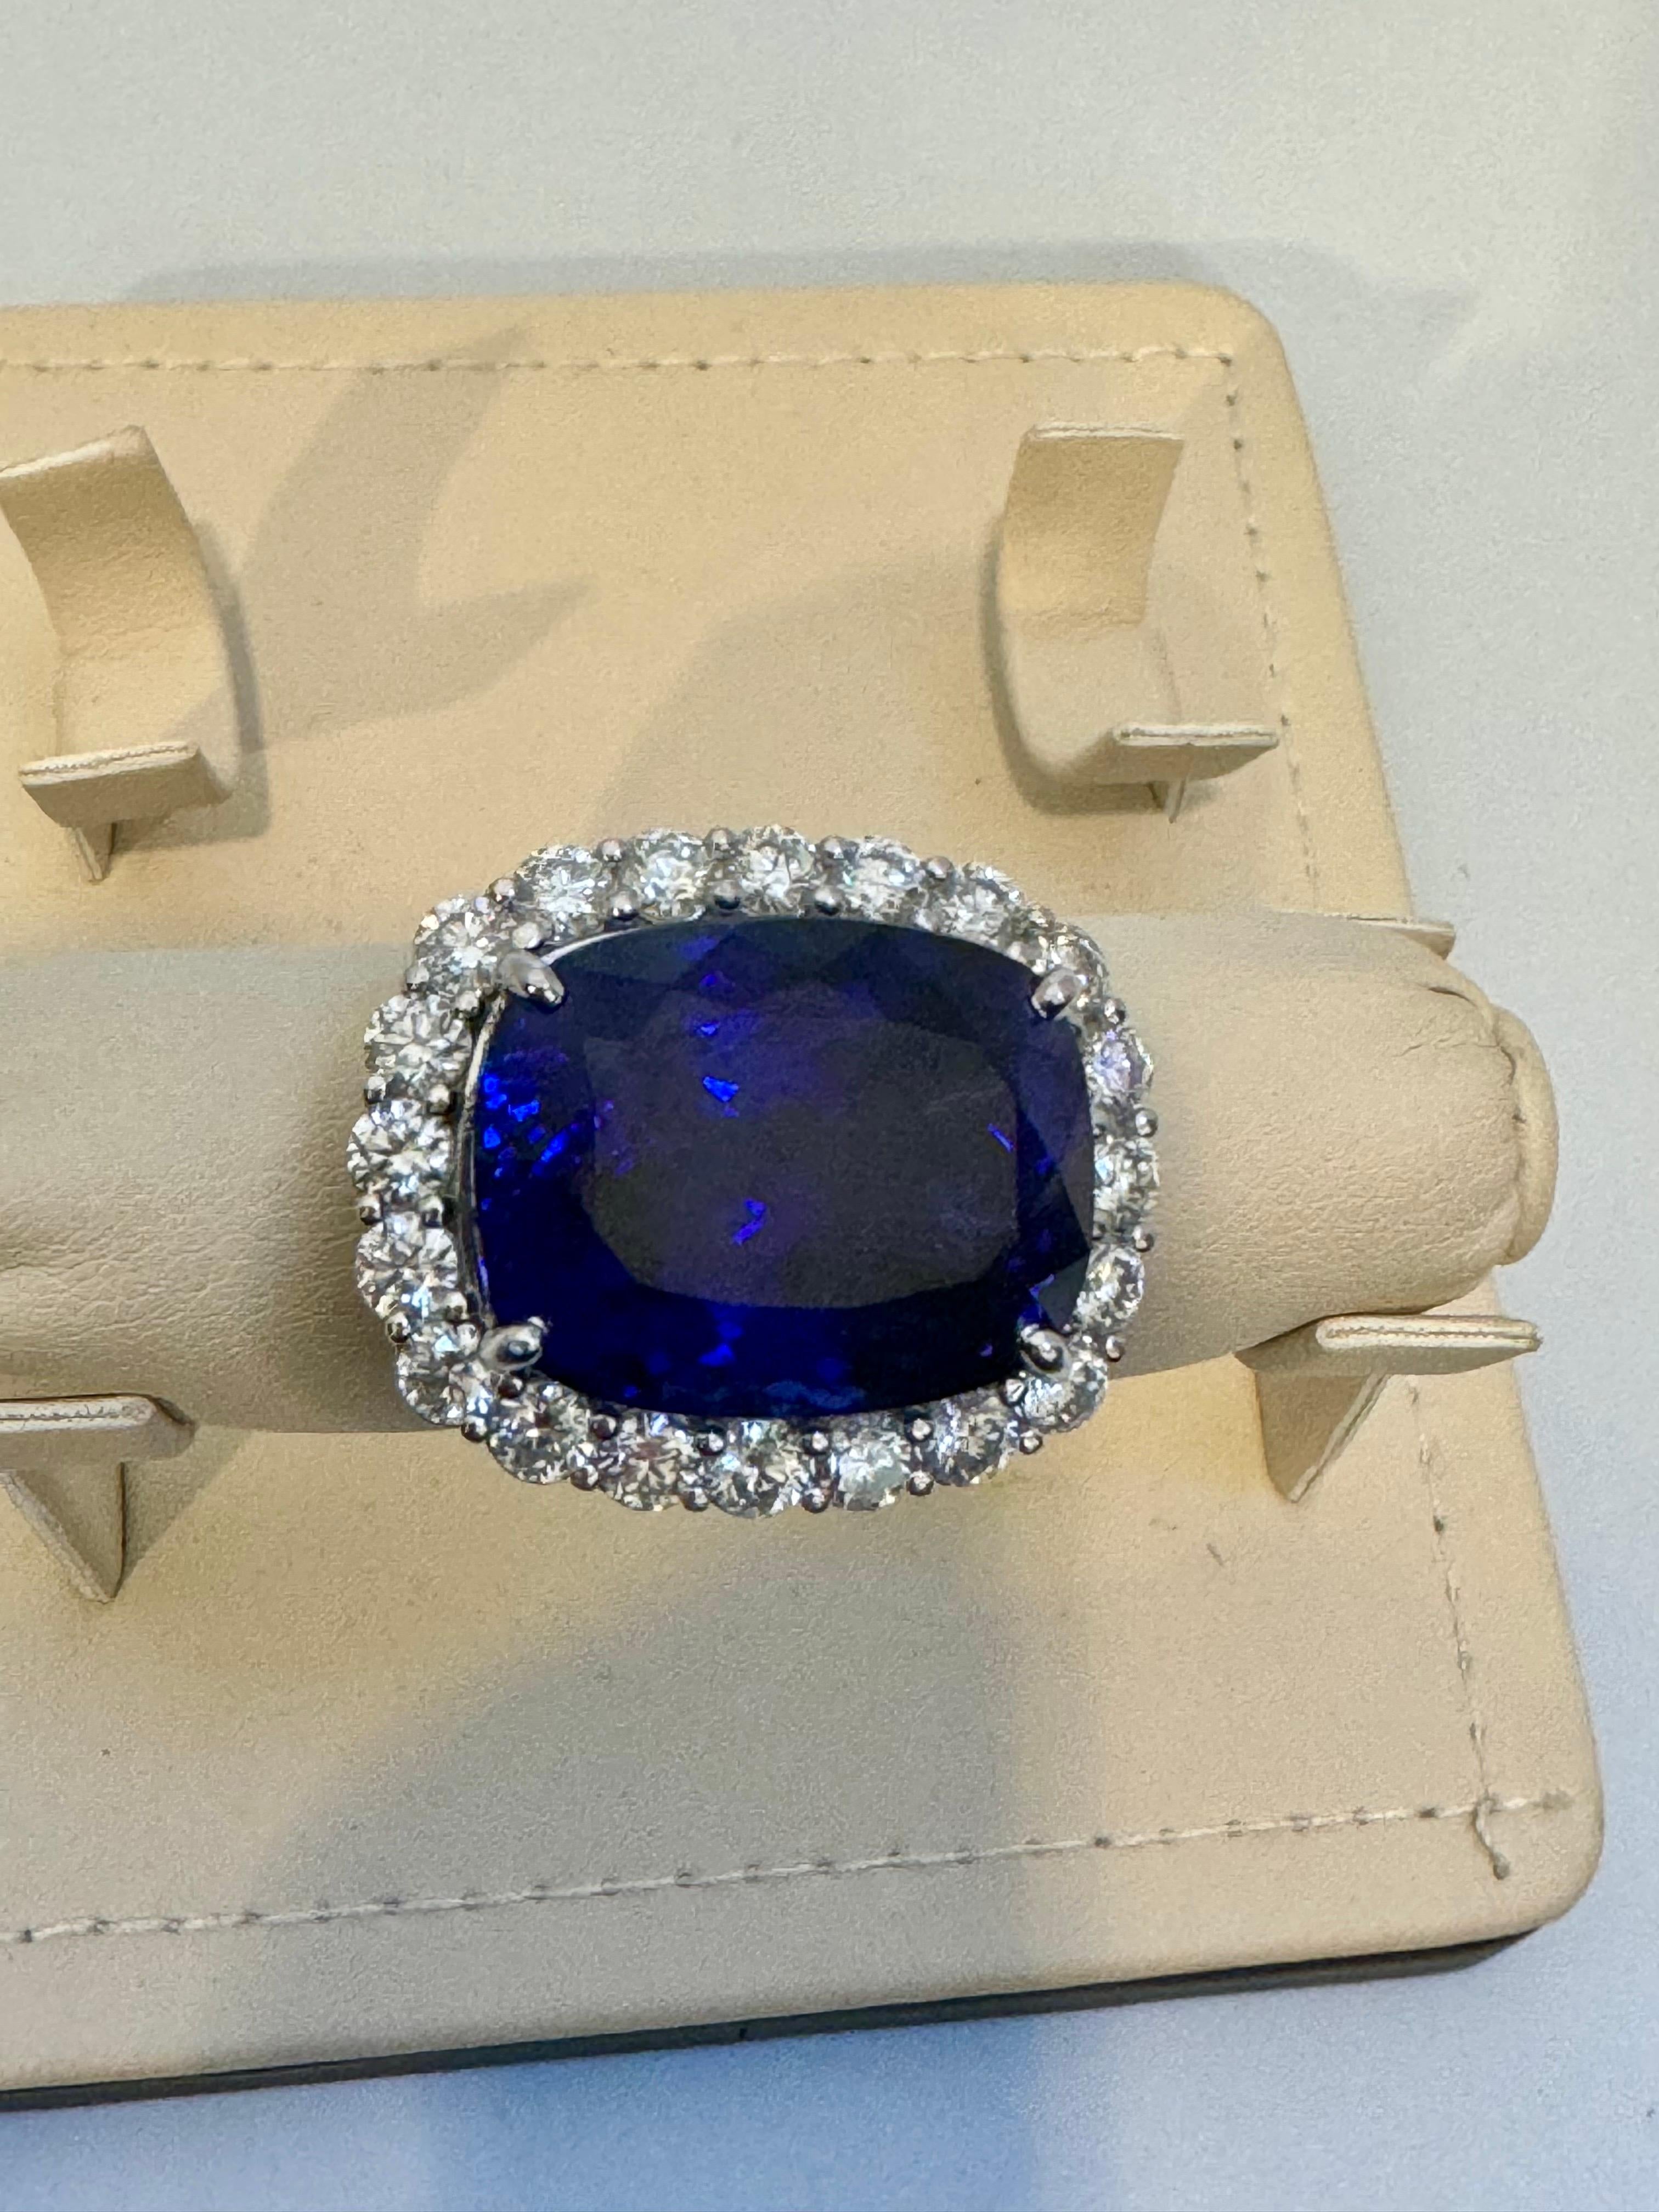 43.74 Ct Cushion-Cut Tanzanite & 4 Ct  Diamond Ring in 14K White Gold Size 6.5 In Excellent Condition For Sale In New York, NY